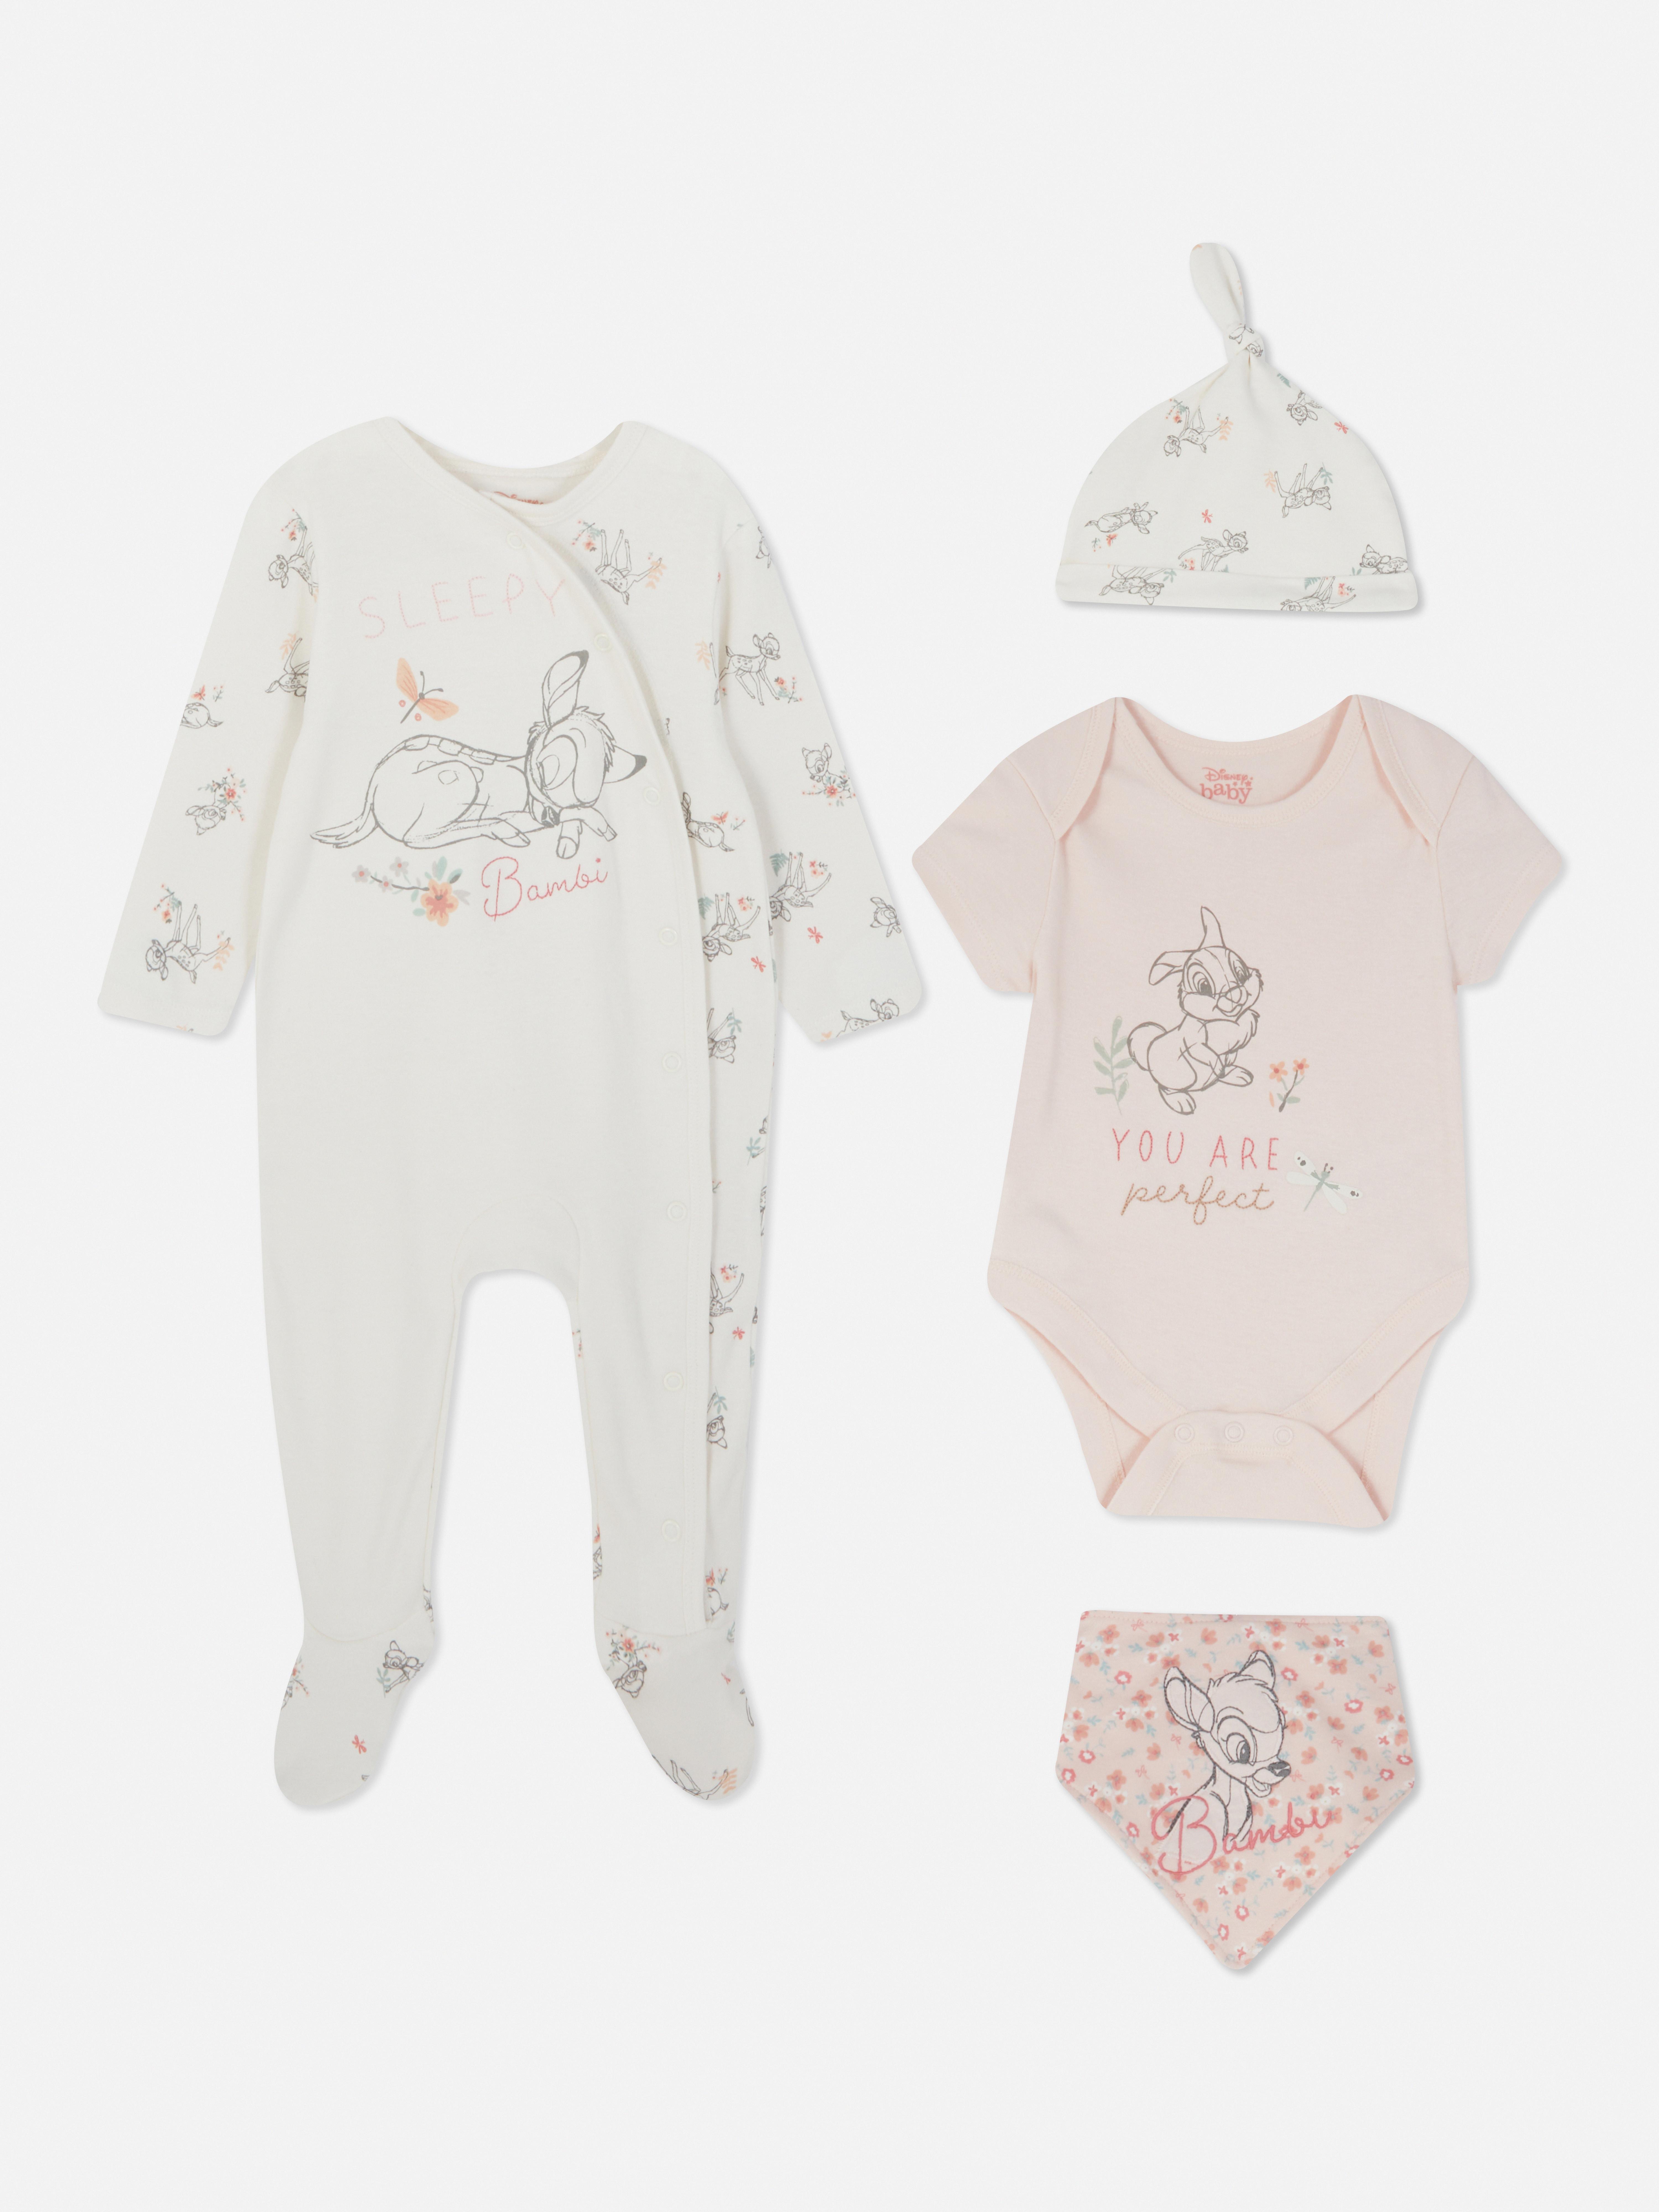 Disney’s Bambi and Thumper Clothing & Accessories Set